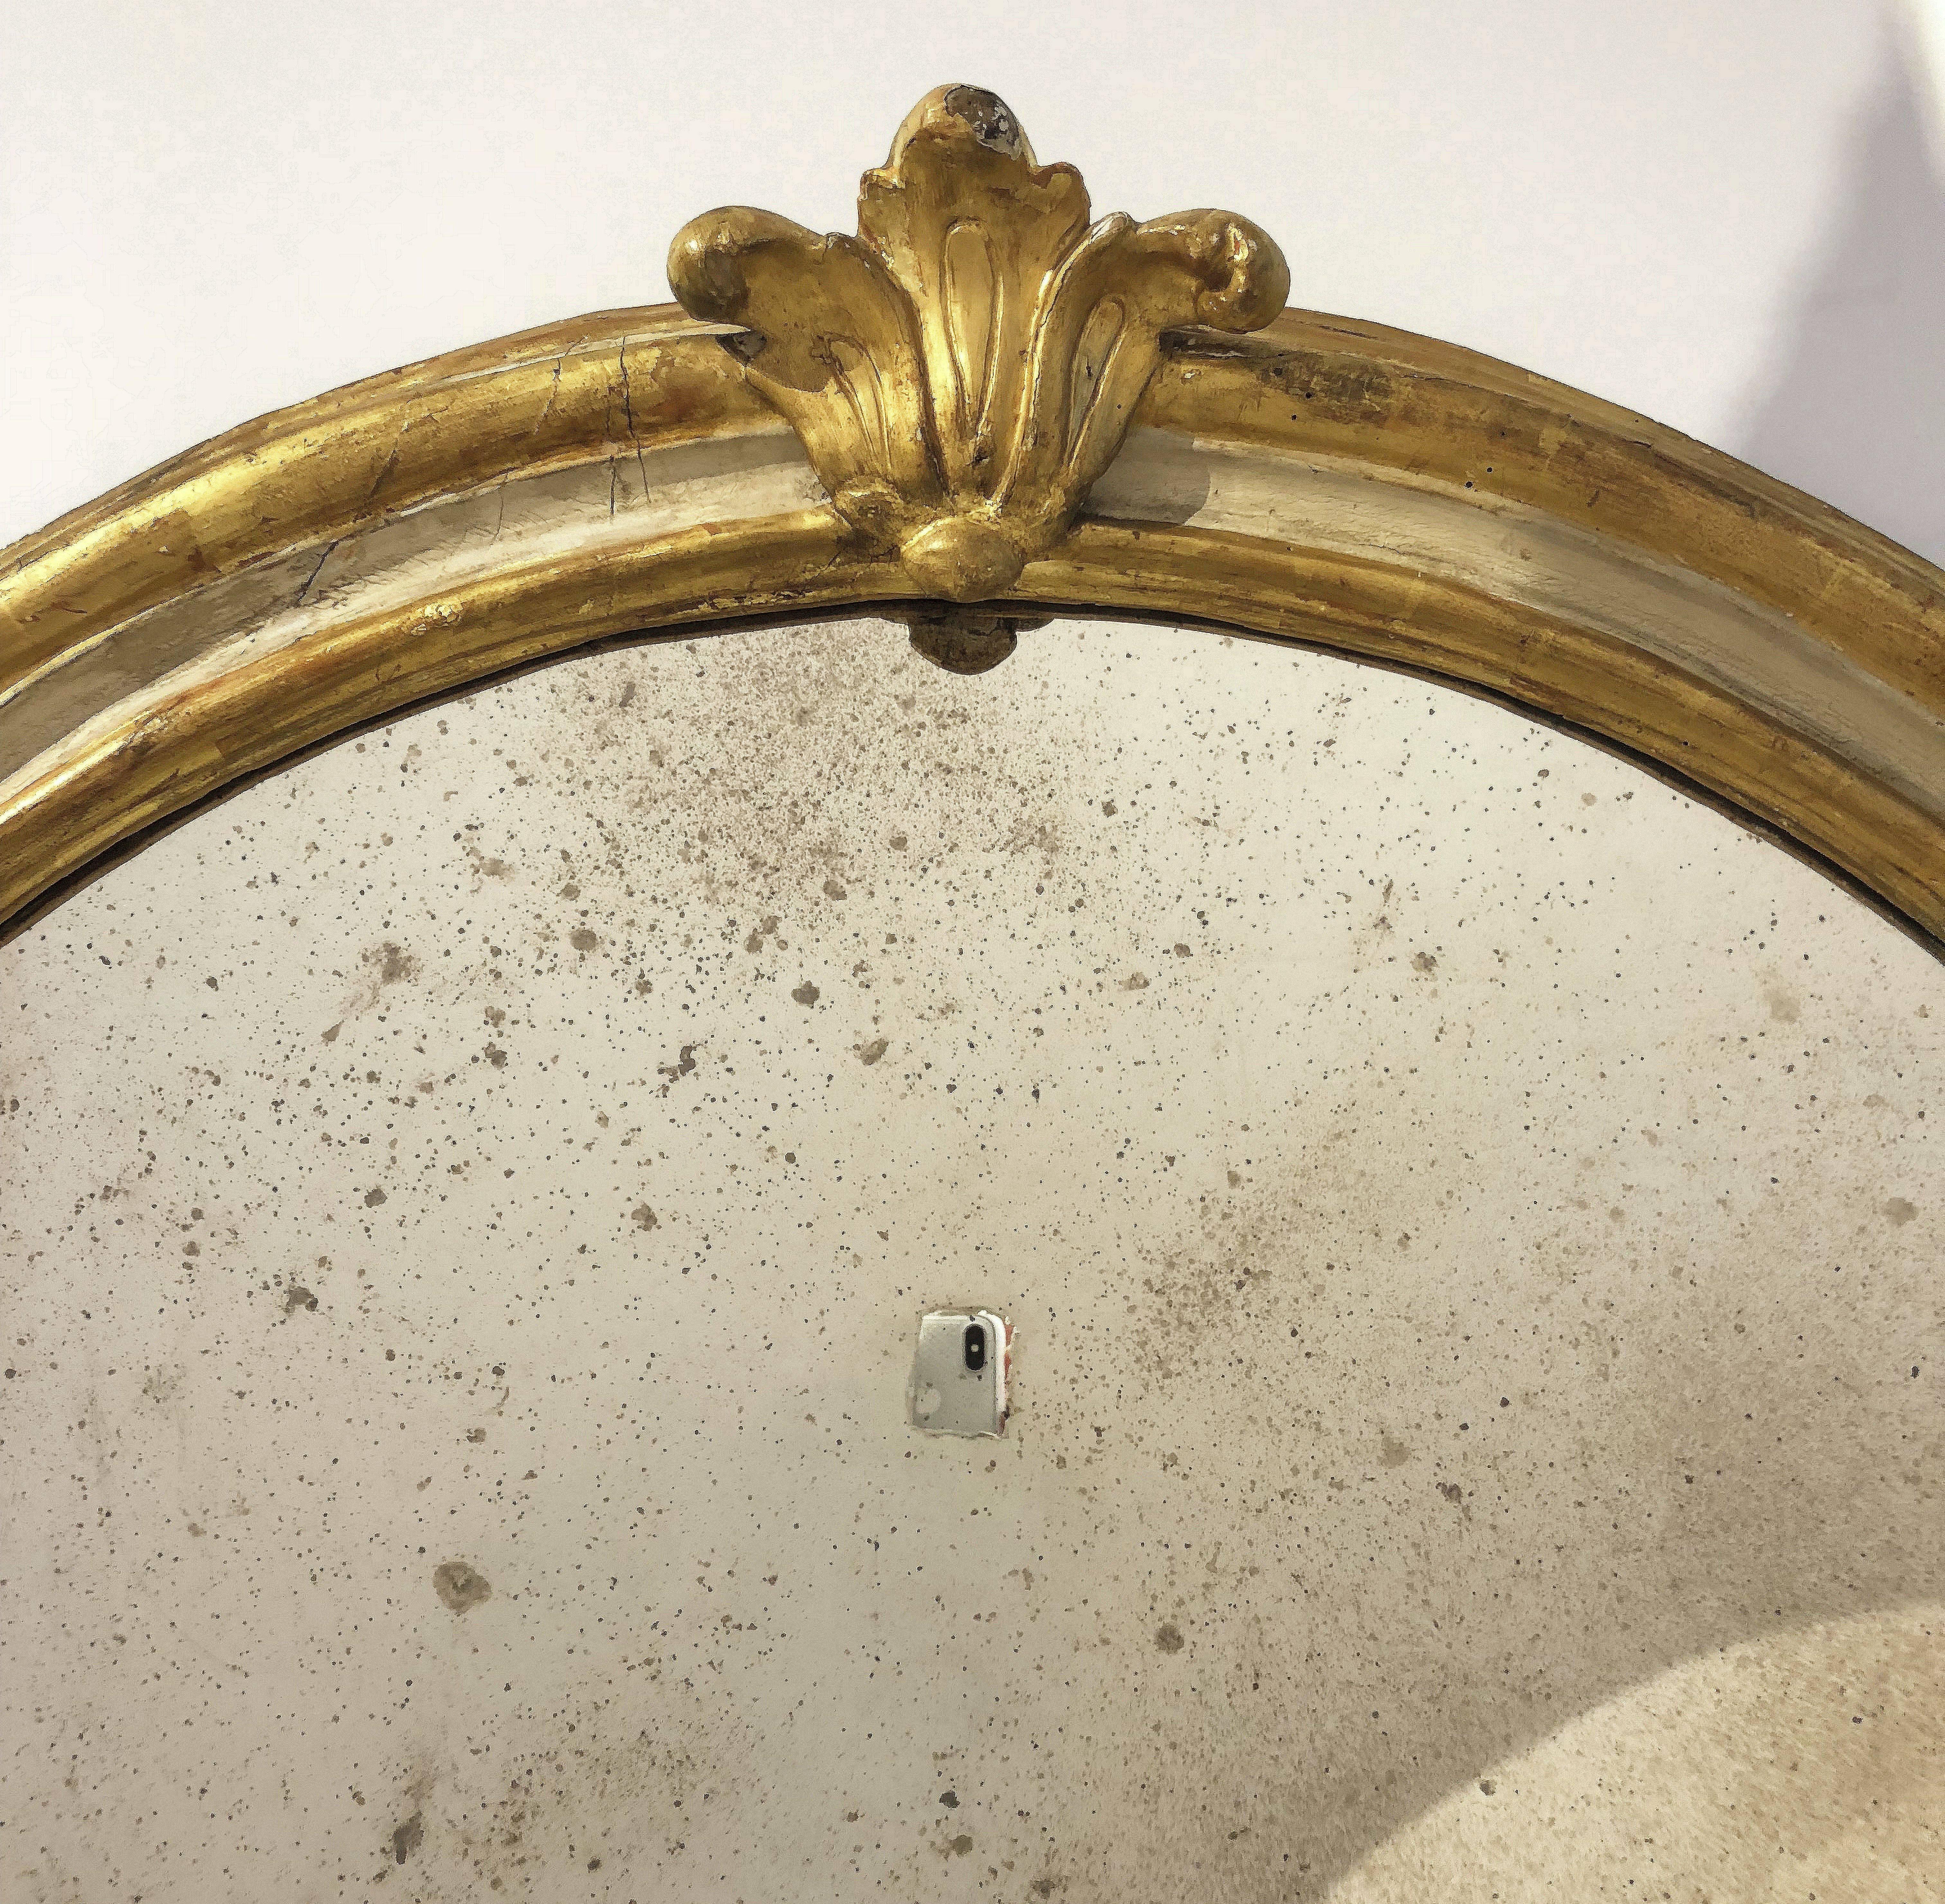 A fine Italian large wall mirror featuring a moulded surround with a beautiful patinated gold-leaf.

Dimensions: H 65 inches x W 37 inches.

